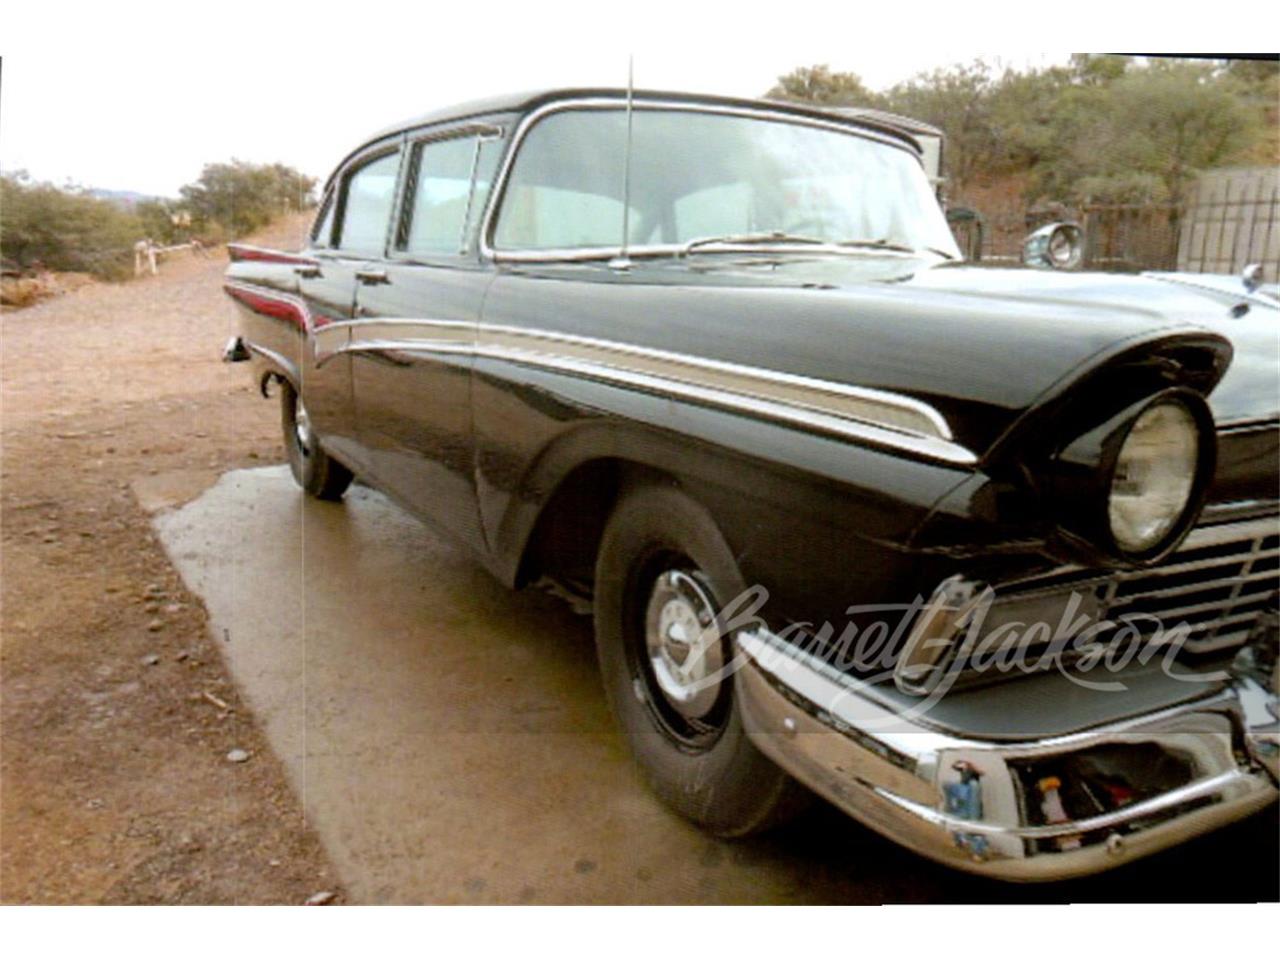 For Sale at Auction: 1957 Ford Custom 300 in Scottsdale, Arizona for sale in Scottsdale, AZ